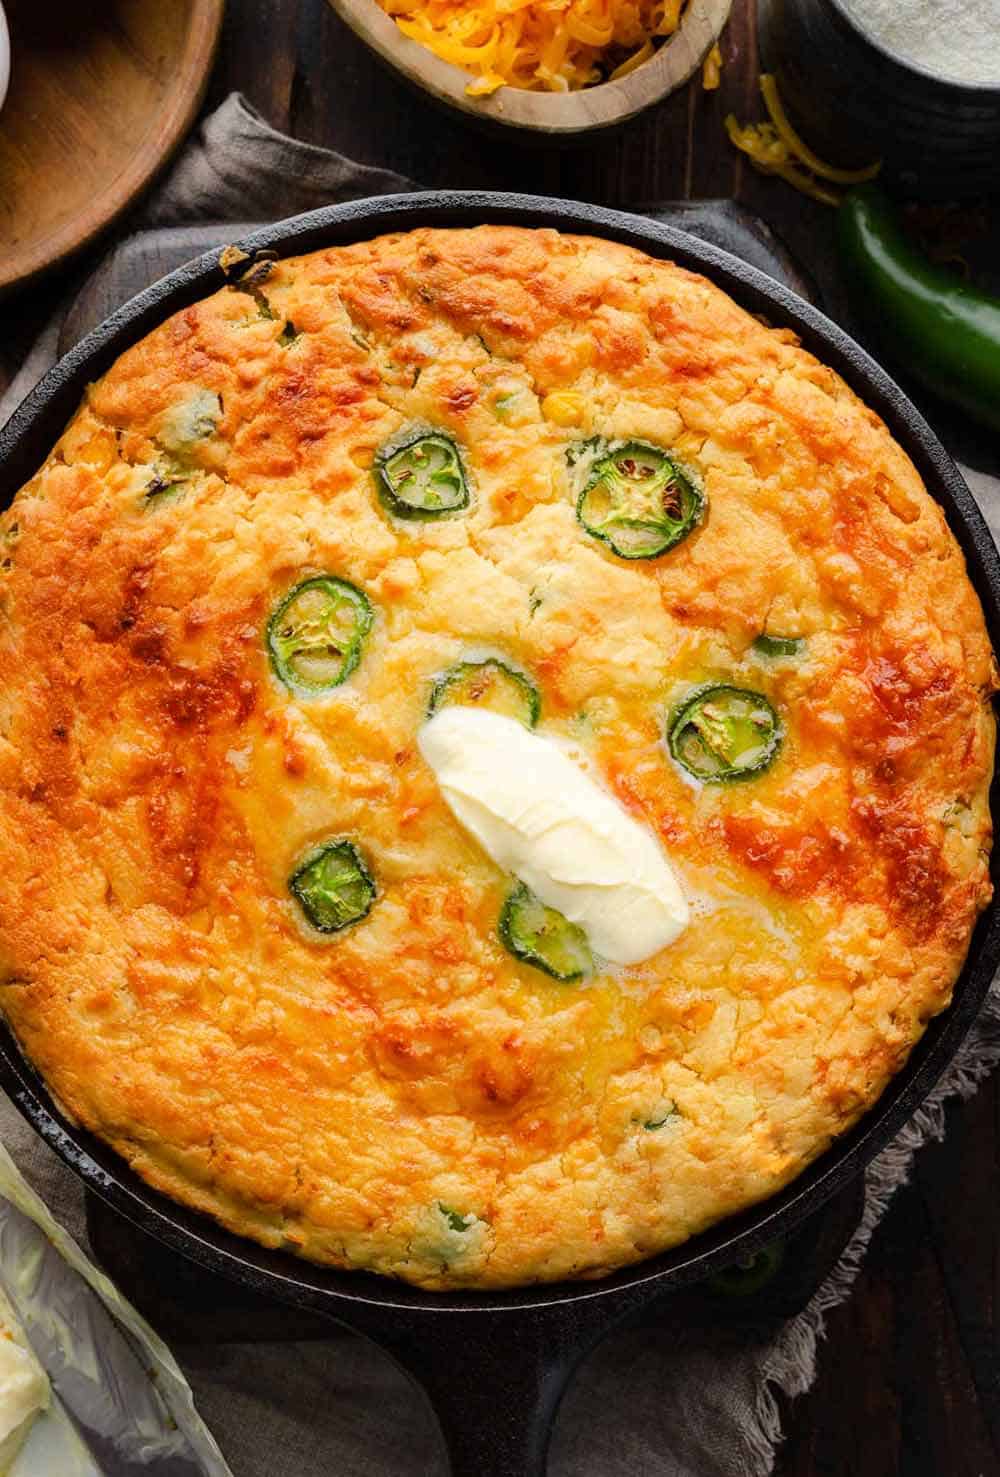 A golden-brown Jalapeno Cheddar Cornbread fresh out of the oven, resting in a cast iron skillet. The cornbread is topped with melting butter